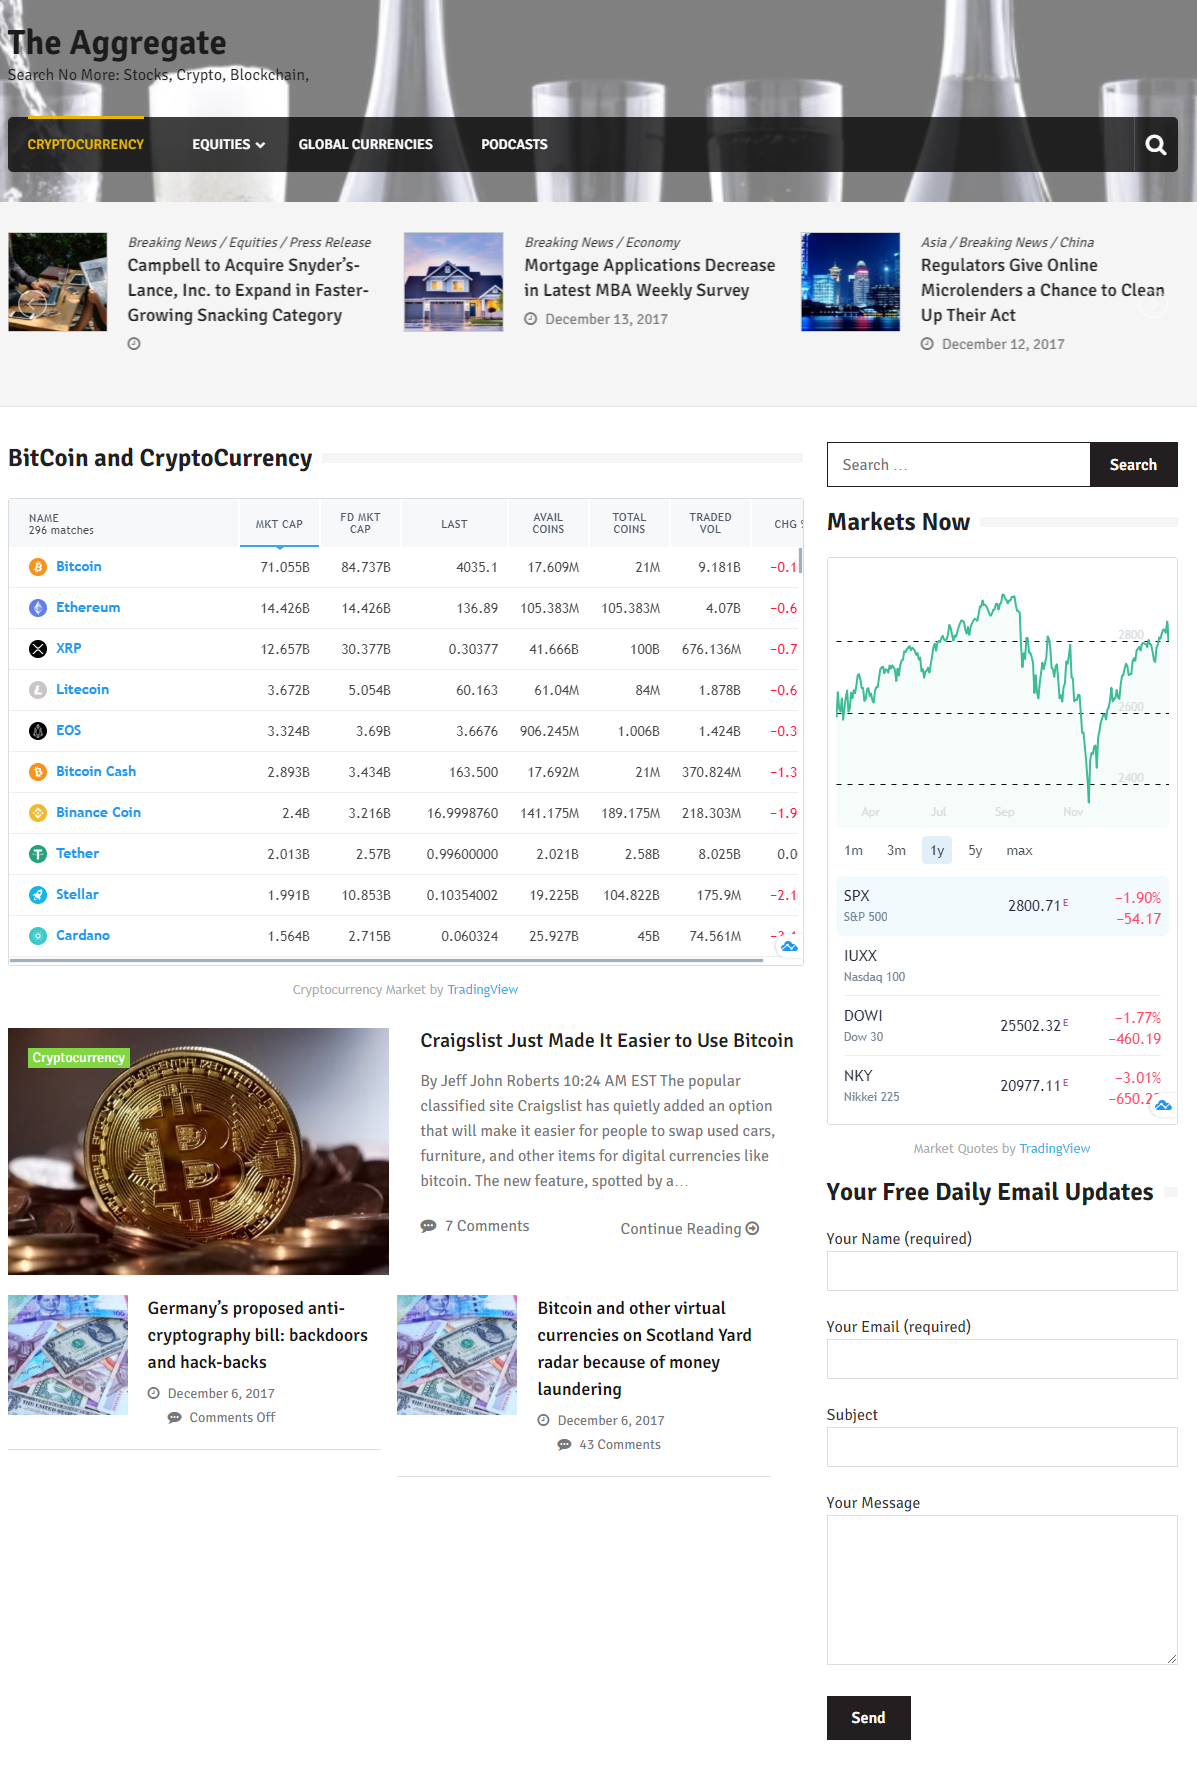 The Aggregate News and CryptoCurrency Focus and Market Integration